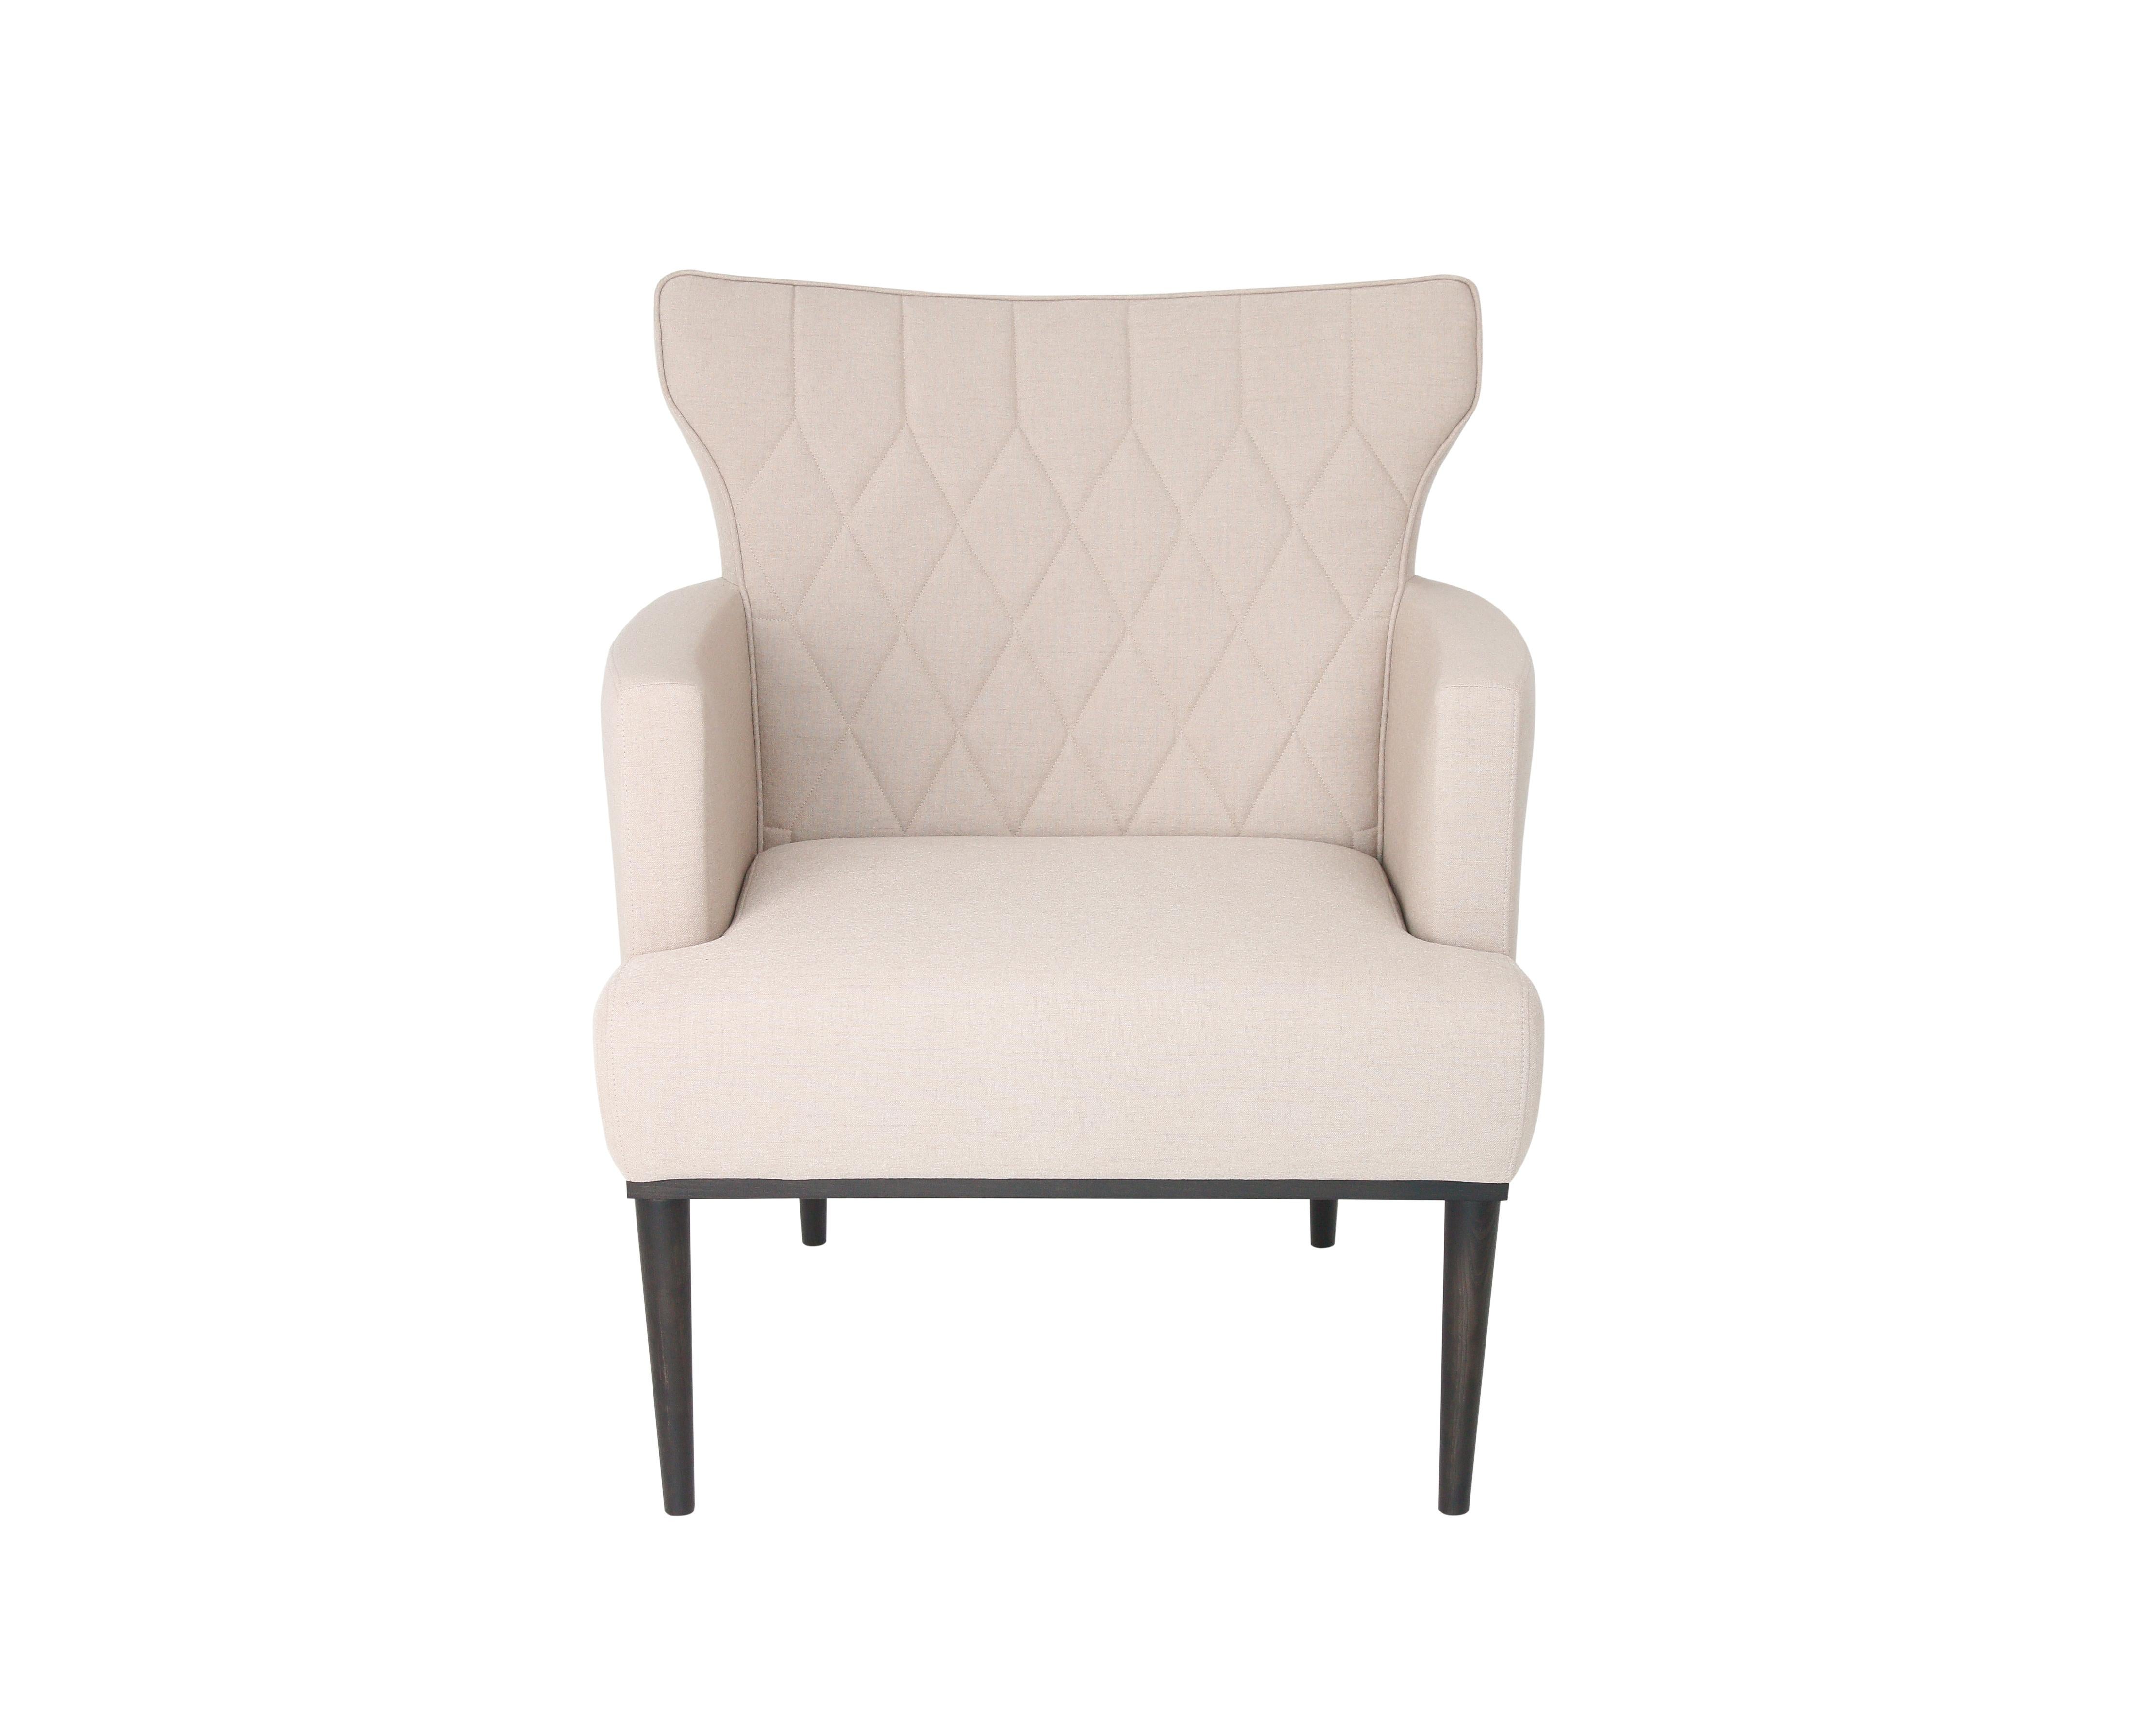 Ash Upholstered armchair with stitching detail backrest For Sale